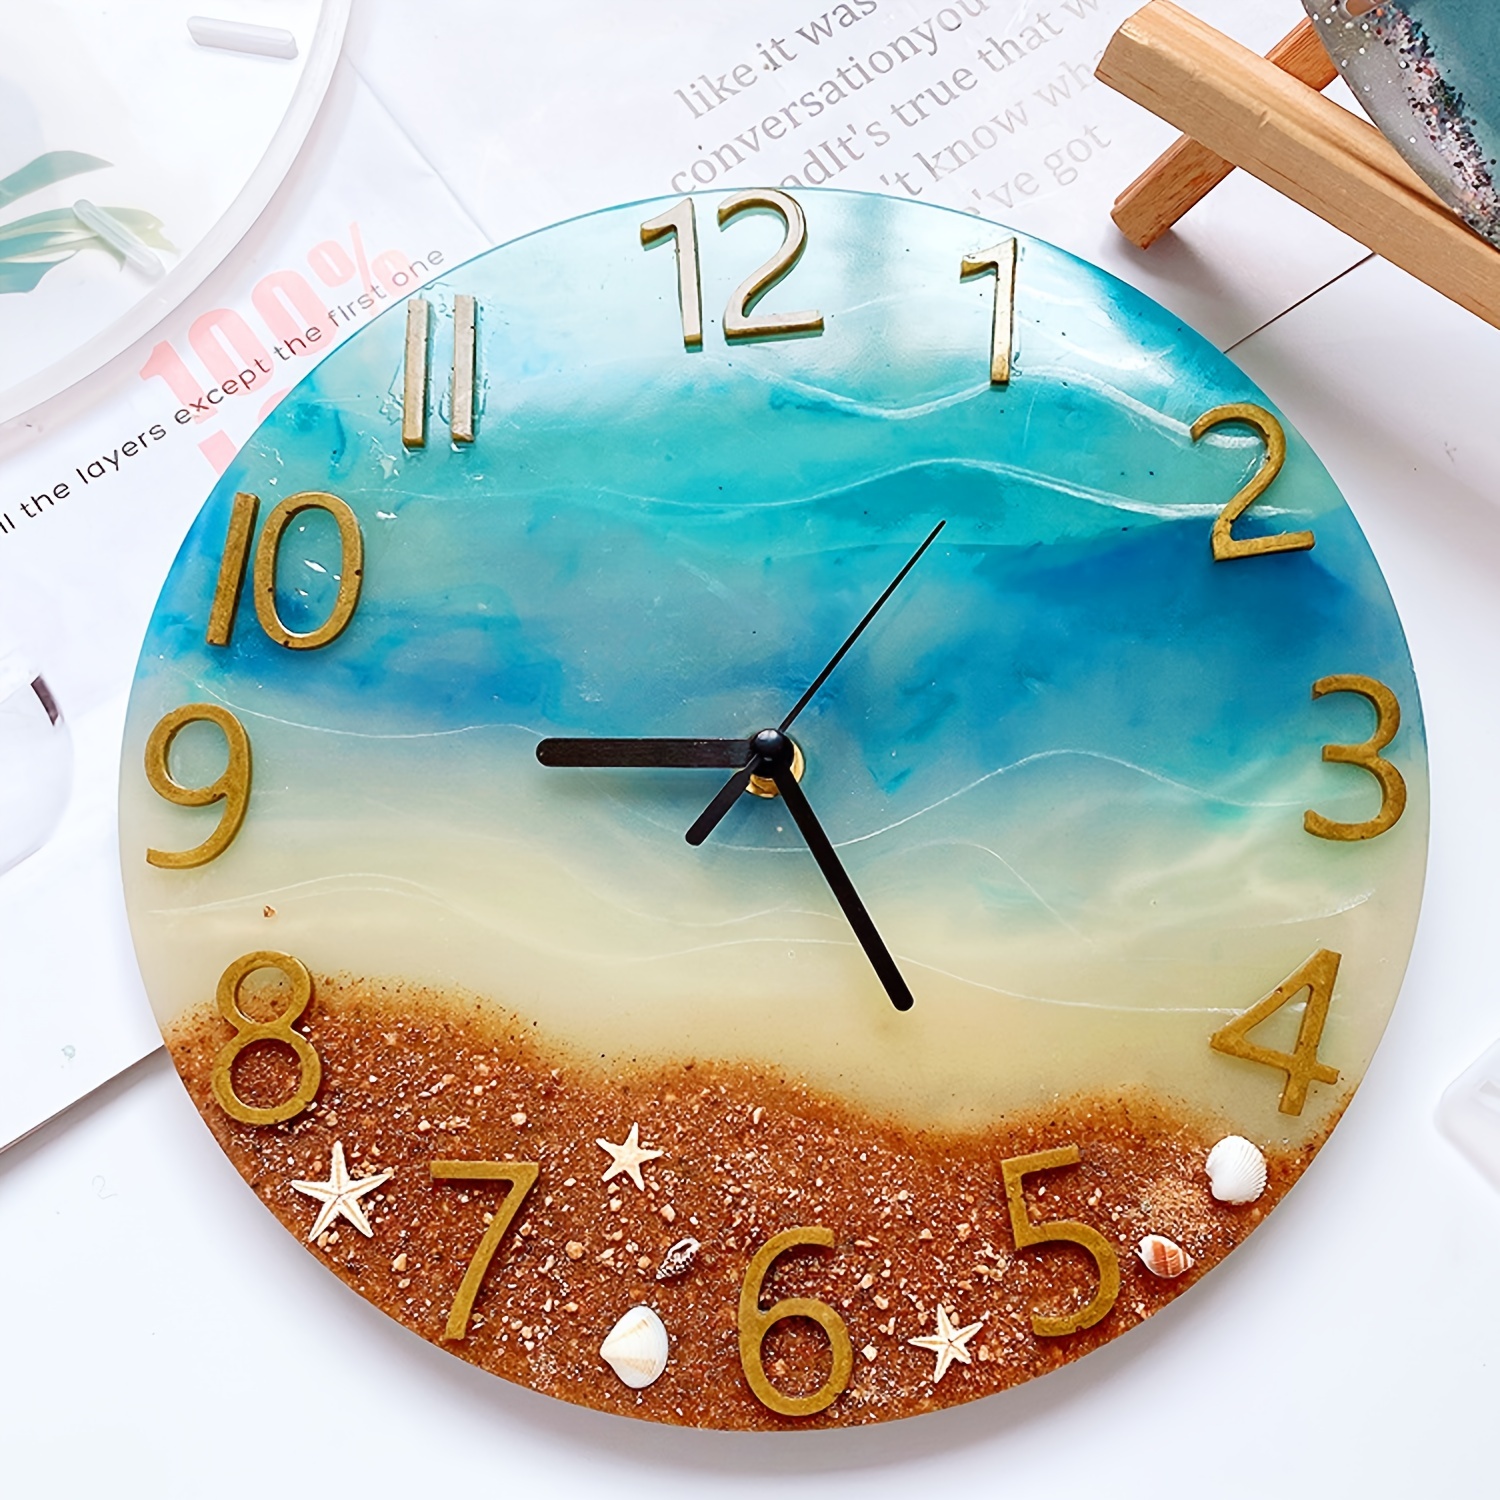 Large Clock Resin Mold 15, Shiny Resin Silicone Mold, Giant Roman Numerals Clock  Mold, Decorative Wall Clock With Numbers Molds Set 